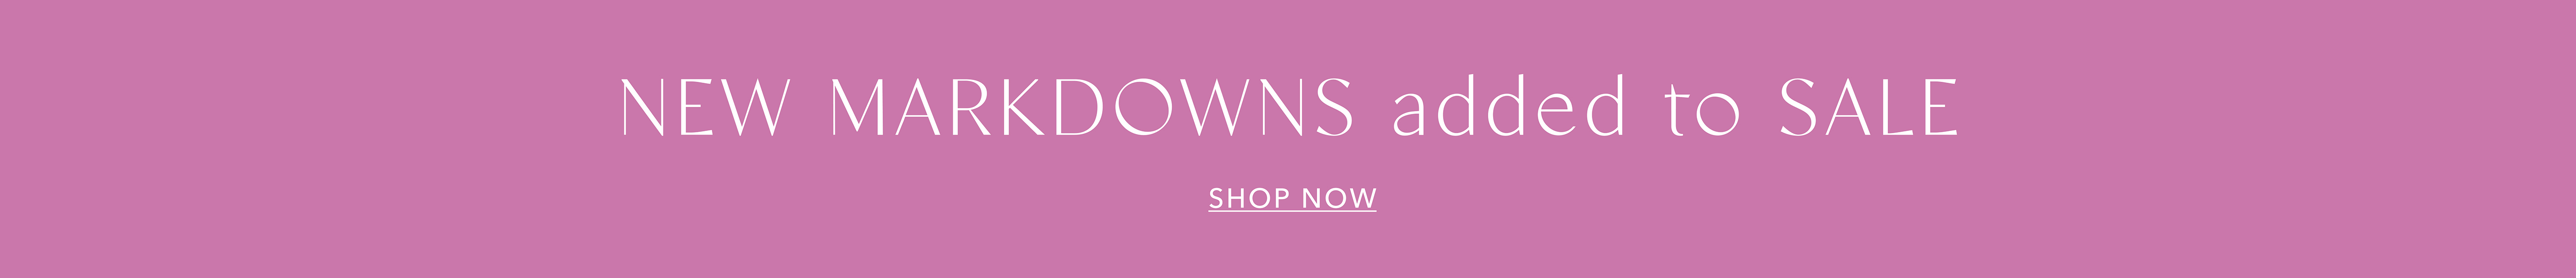 NEW MARKDOWNS ADDED TO SALE  | SHOP SALE